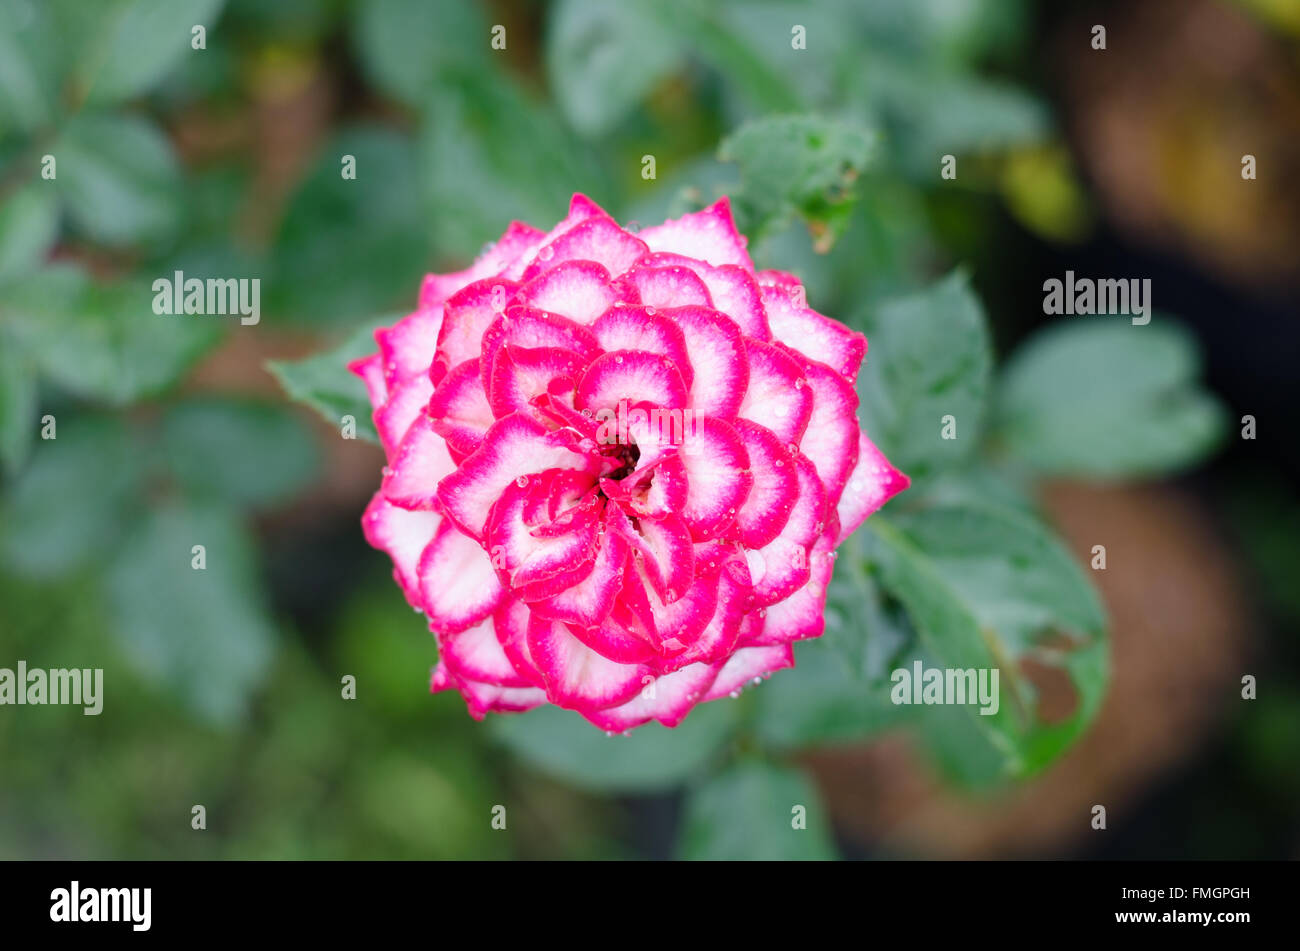 Two color rose blooming in garden Stock Photo